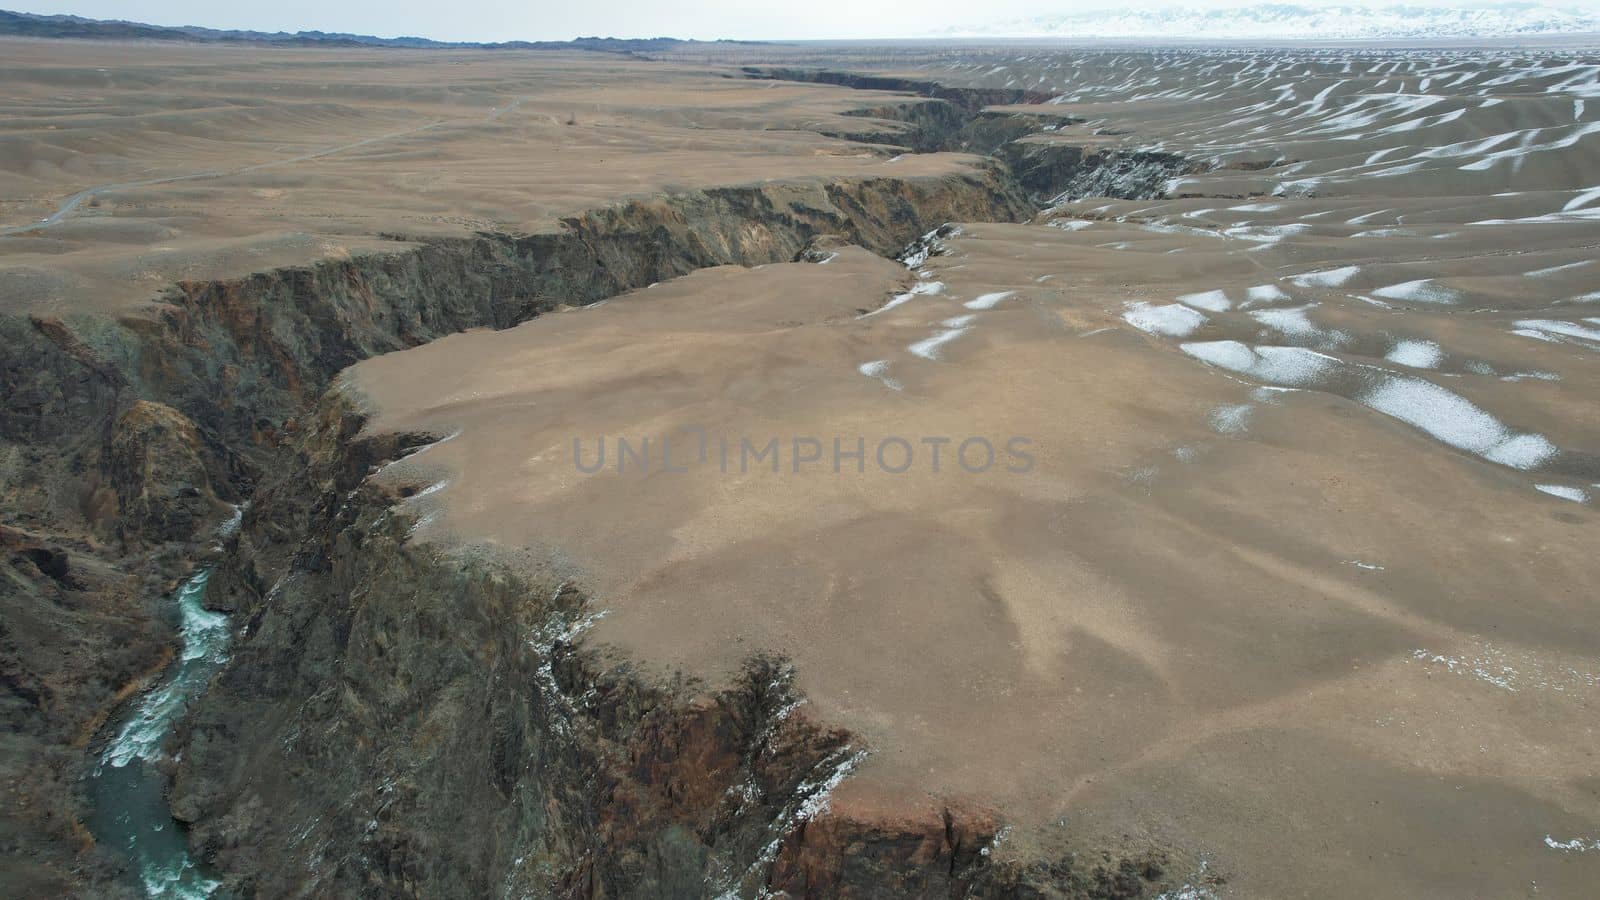 The Grand Canyon in the steppe with the emerald river. A crack in the ground with black stones, the green color of the river. Bushes grow in places. There are tourists and buses on edge. Kazakhstan